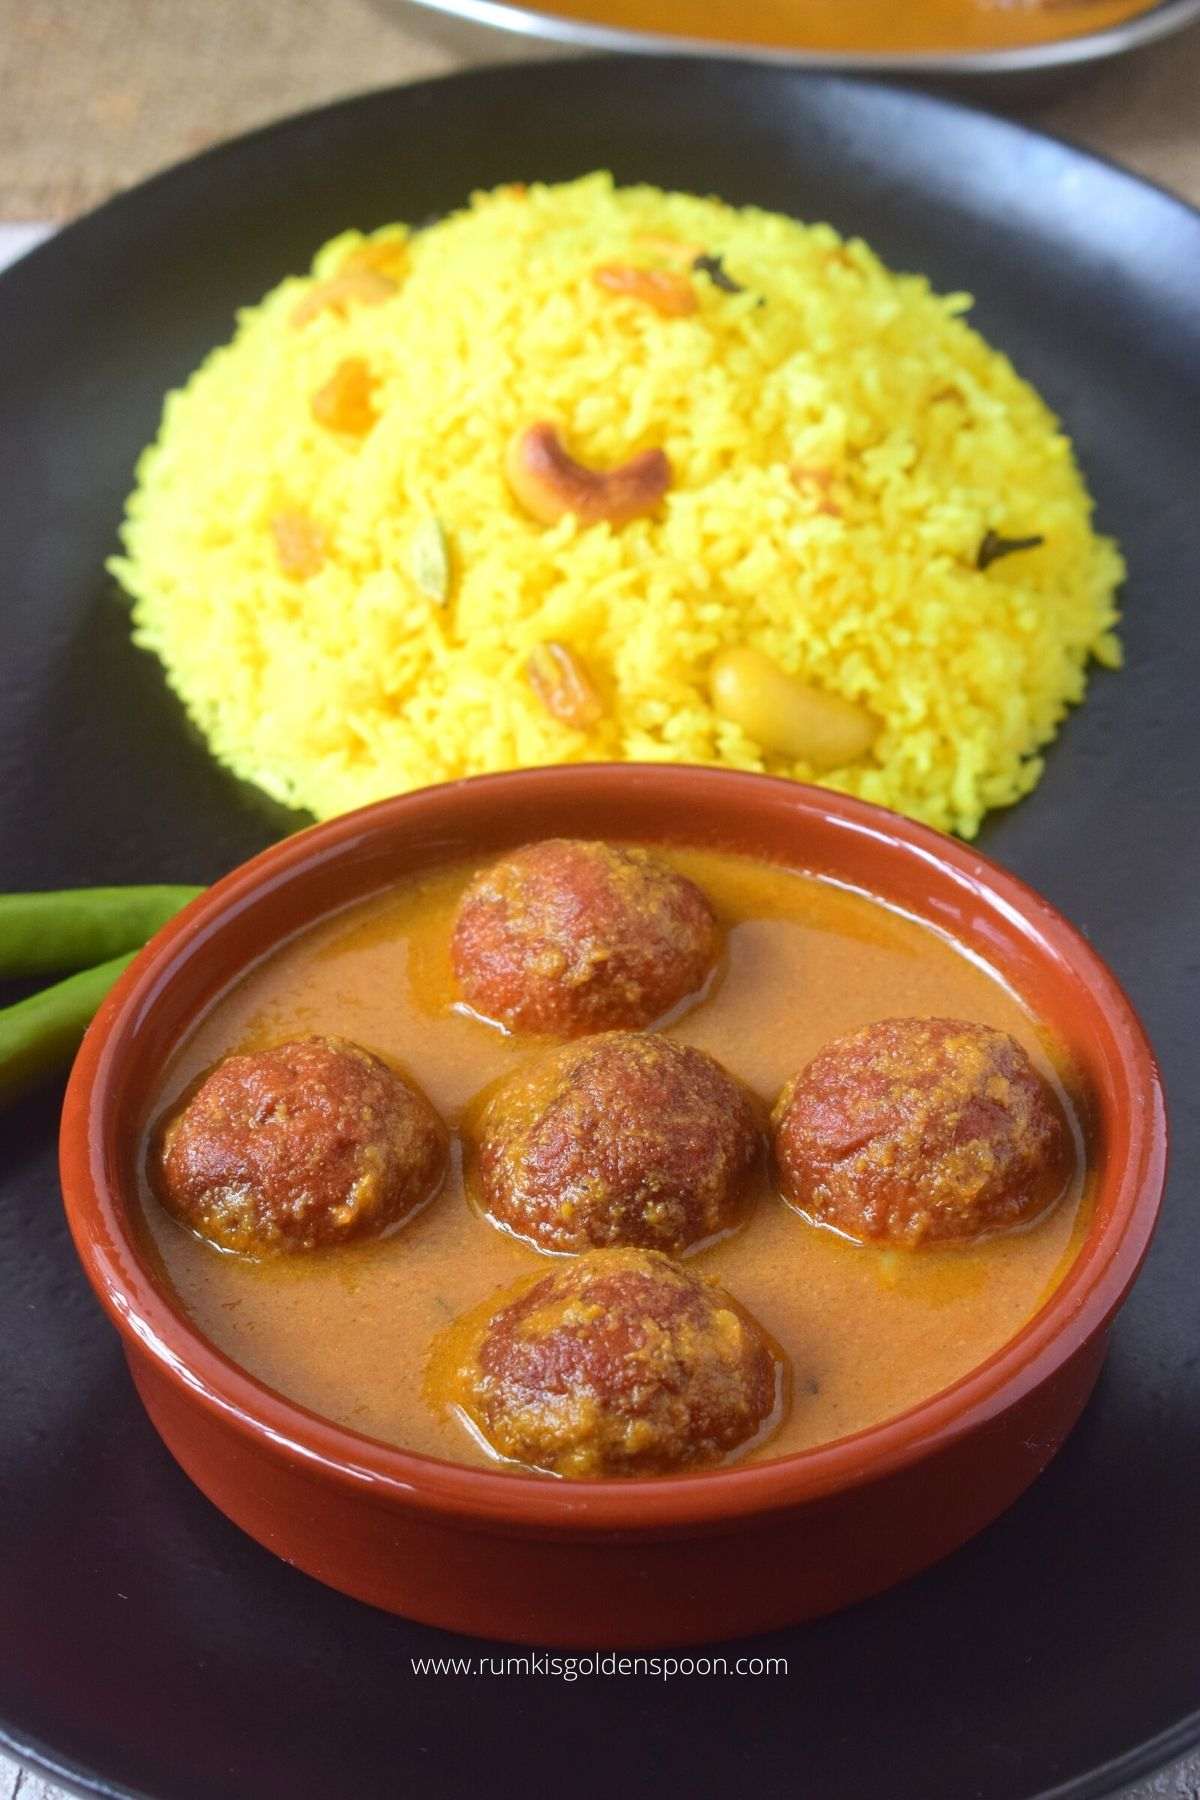 chanar kalia, chanar kalia recipe, chanar kalia bengali recipe, chanar kofta kalia, chanar kofta kalia recipe, Bengali cottage cheese curry, how to make chanar kalia, bengali recipe, bengali recipes, bengali food, bengali food recipes, recipes of bengali food, traditional bengali food, bengali recipes veg, niramish tarkari, niramish recipe, bengali traditional food, traditional food of Bengali, bengali veg recipe, bengali veg recipes, bengali vegetable recipe, bengali vegetarian recipe, Rumki's Golden Spoon